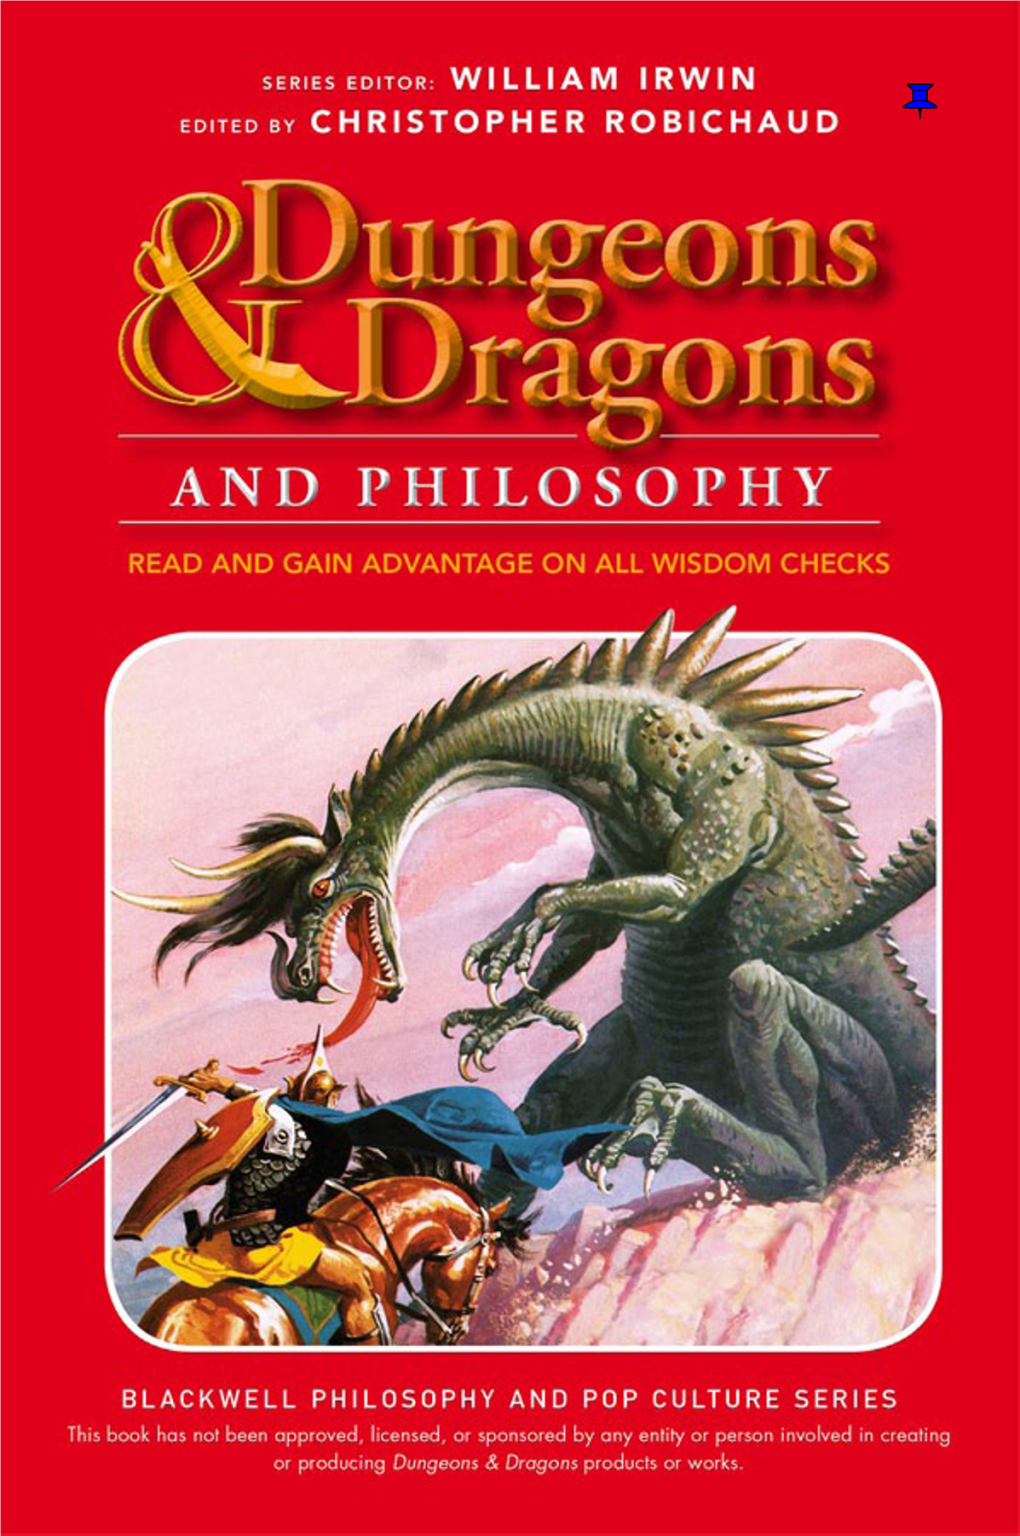 Dungeons & Dragons and Philosophy: Read and Gain Advantage on All Wisdom Checks